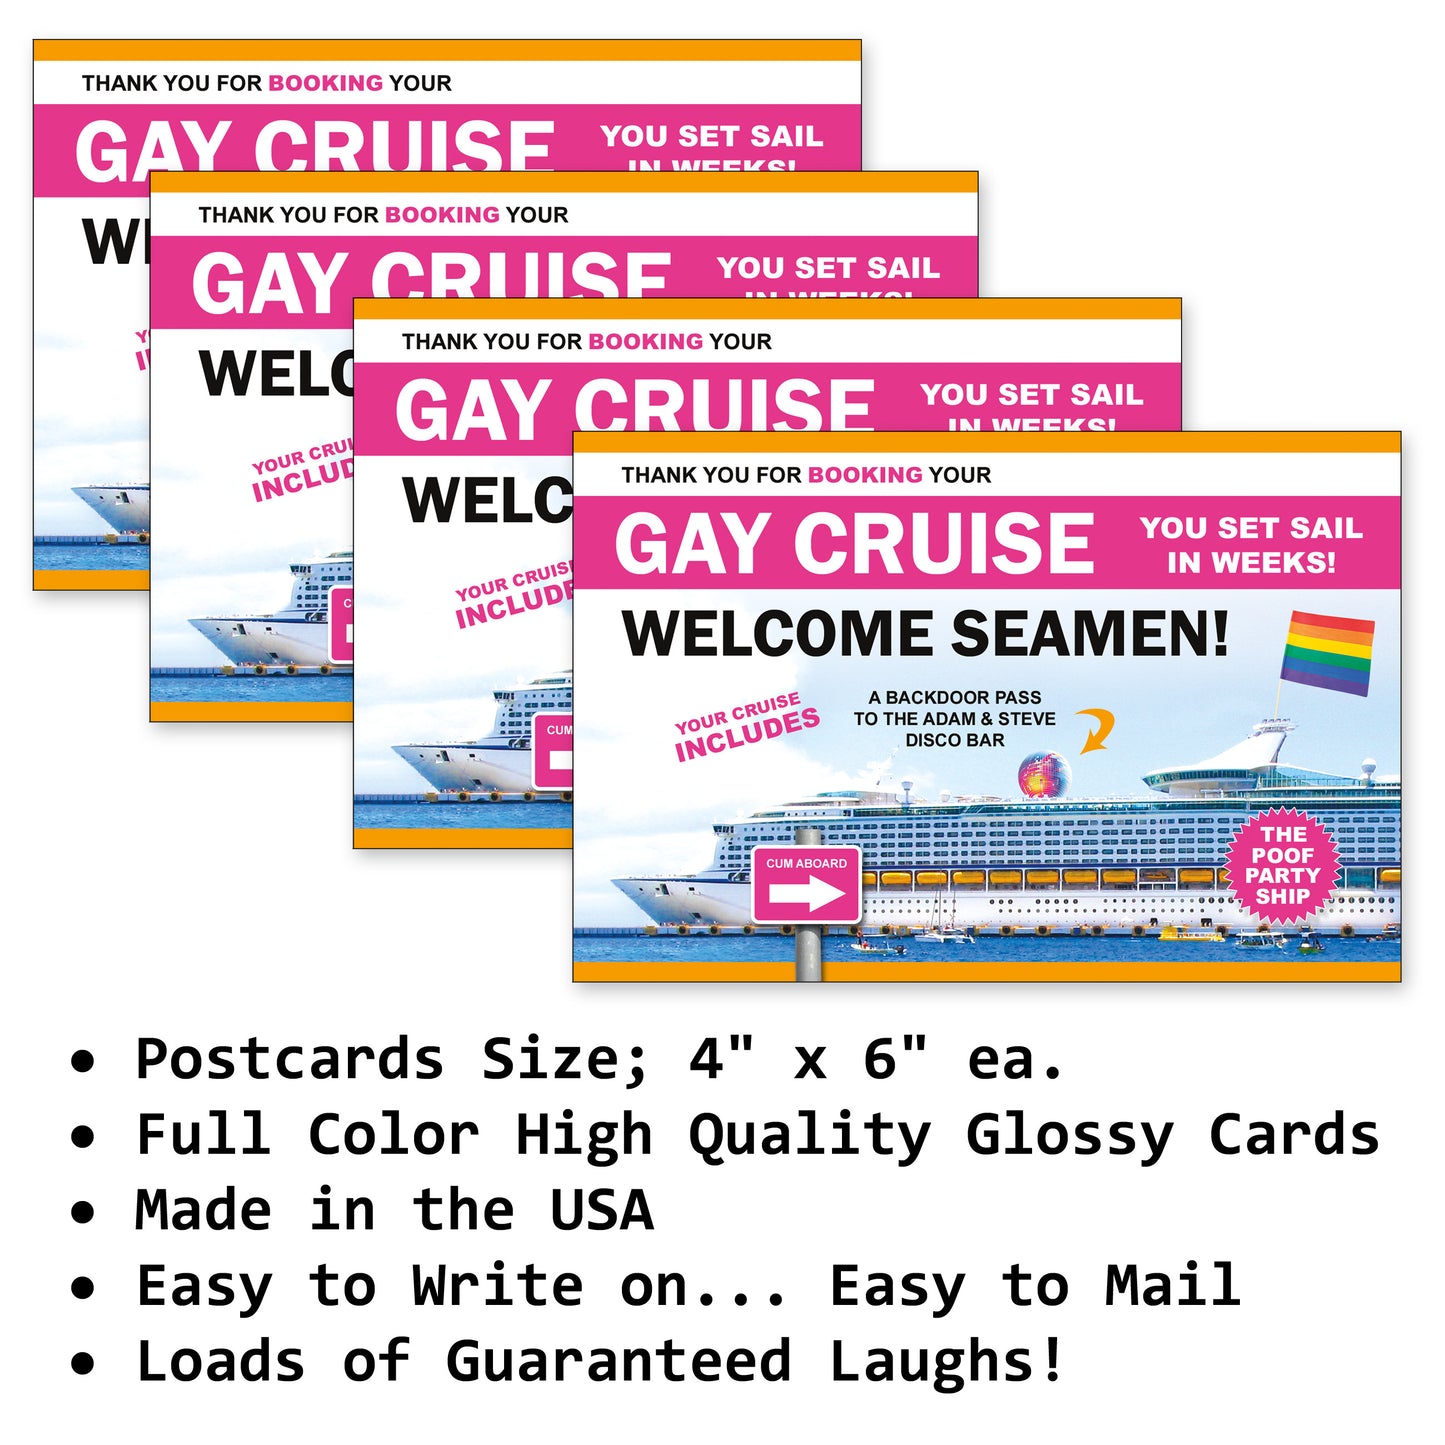 4 Pack Prank Gay Cruise Postcards sent to YOU so you can Play some Gags on your Friends yourself!